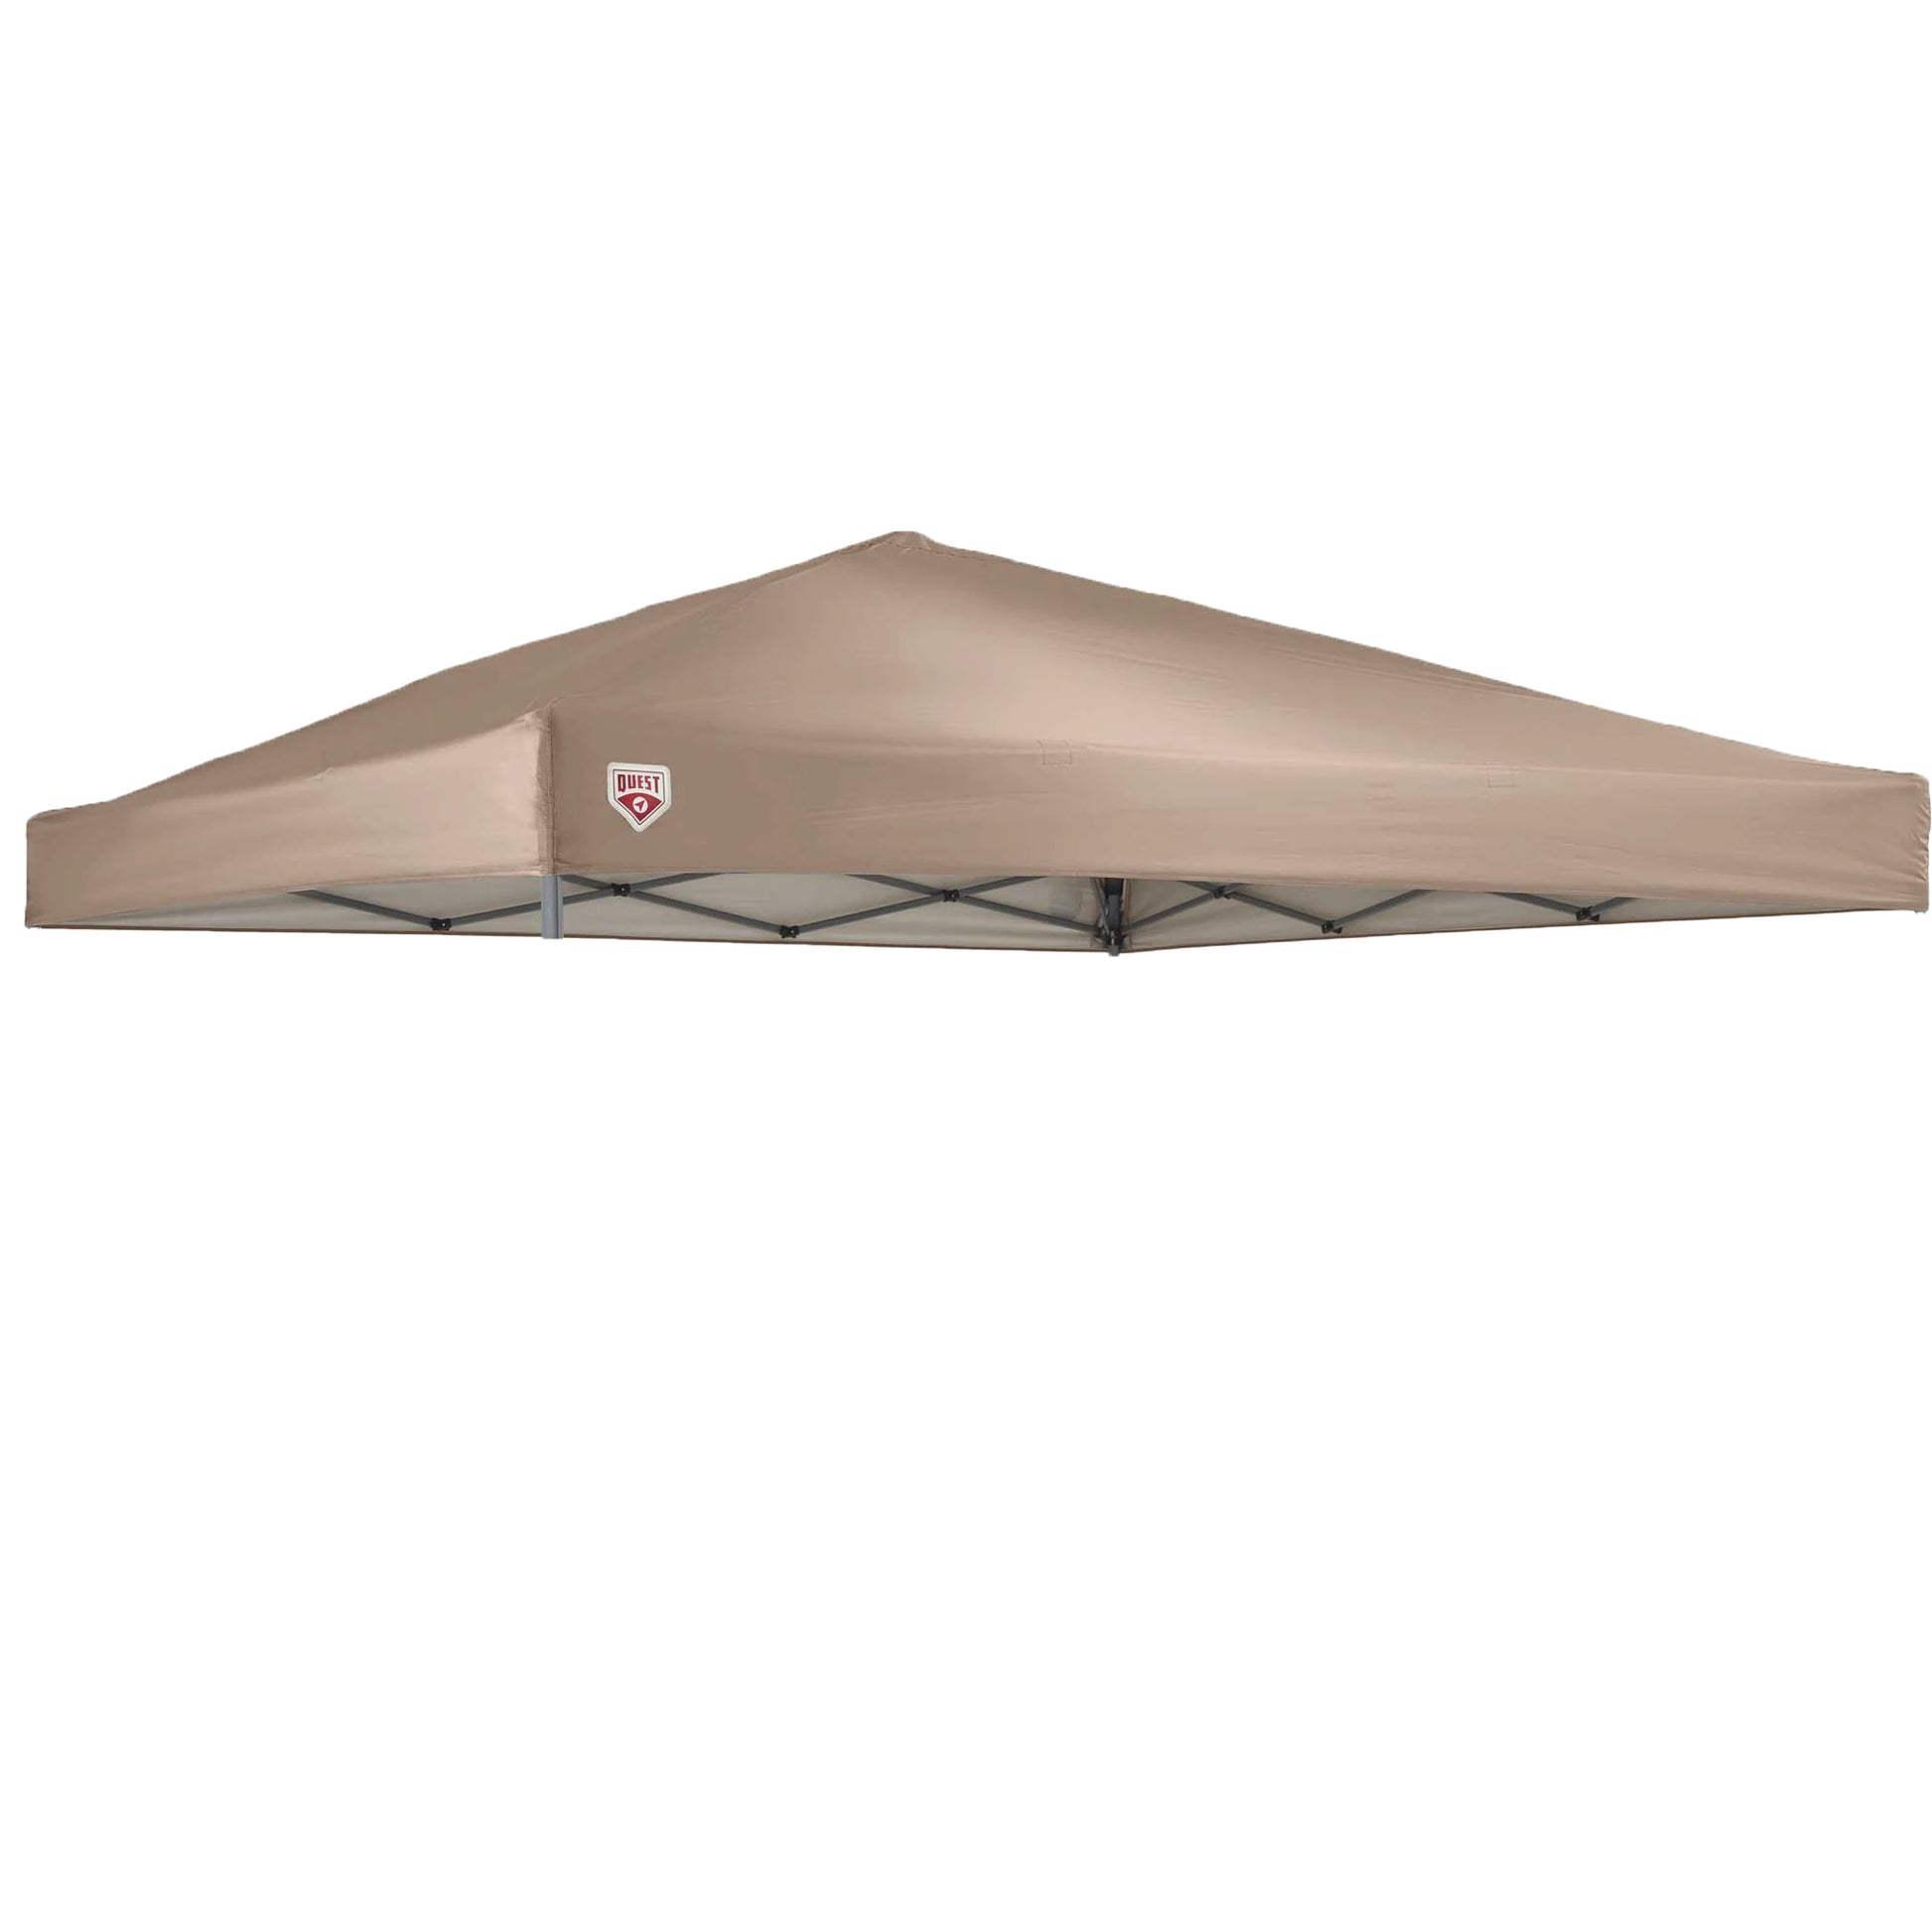 The image shows a beige-colored canopy tent top, with a smooth and stretched fabric covering the structure. The canopy is designed in a square shape and is viewed from a slight angle, looking upwards, which suggests it's mounted on a frame, although the supporting structure is not visible in this view. There is a logo at the peak of the tent, indicating a brand Quest. The background is completely white, emphasizing the tent top as the sole subject of the image.